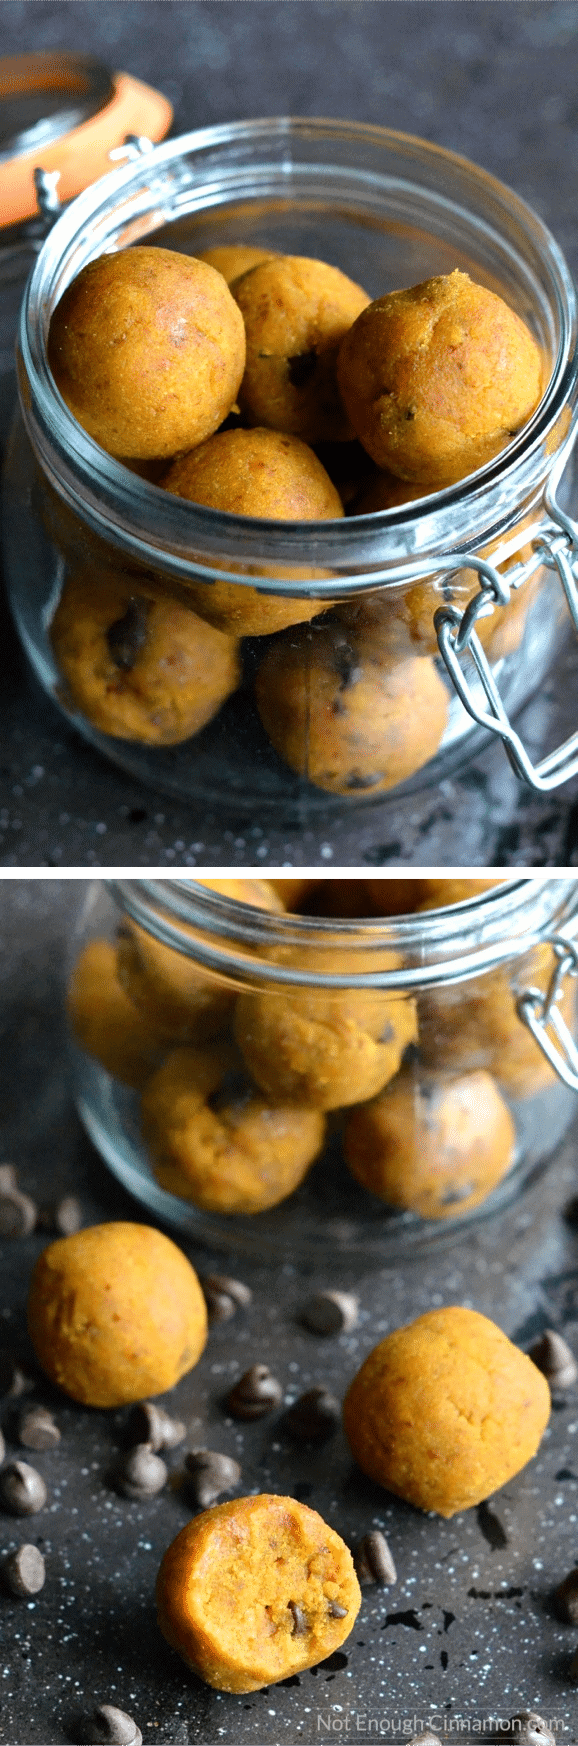 You only need 4 ingredients and 15 minutes to make these Paleo energy bites. The perfect Fall snack! | Find the recipe on NotEnoughCinnamon.com #snack #pumpkin